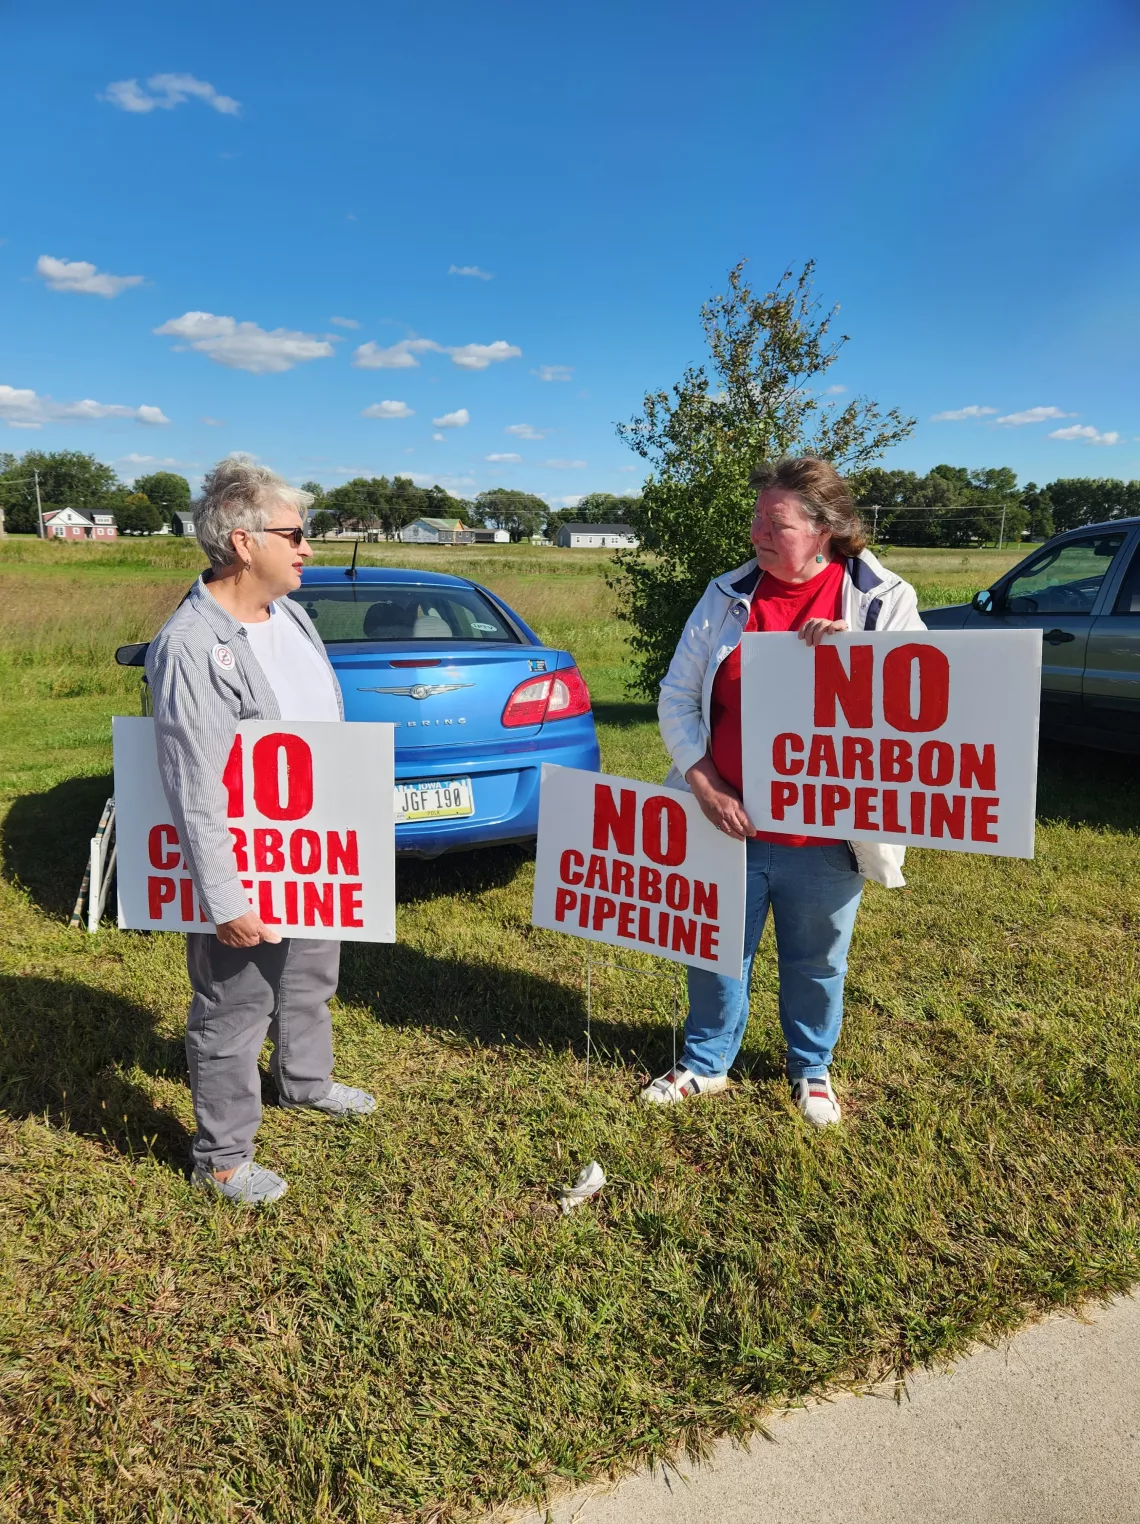 2 people with signs saying "NO Carbon Pipeline"